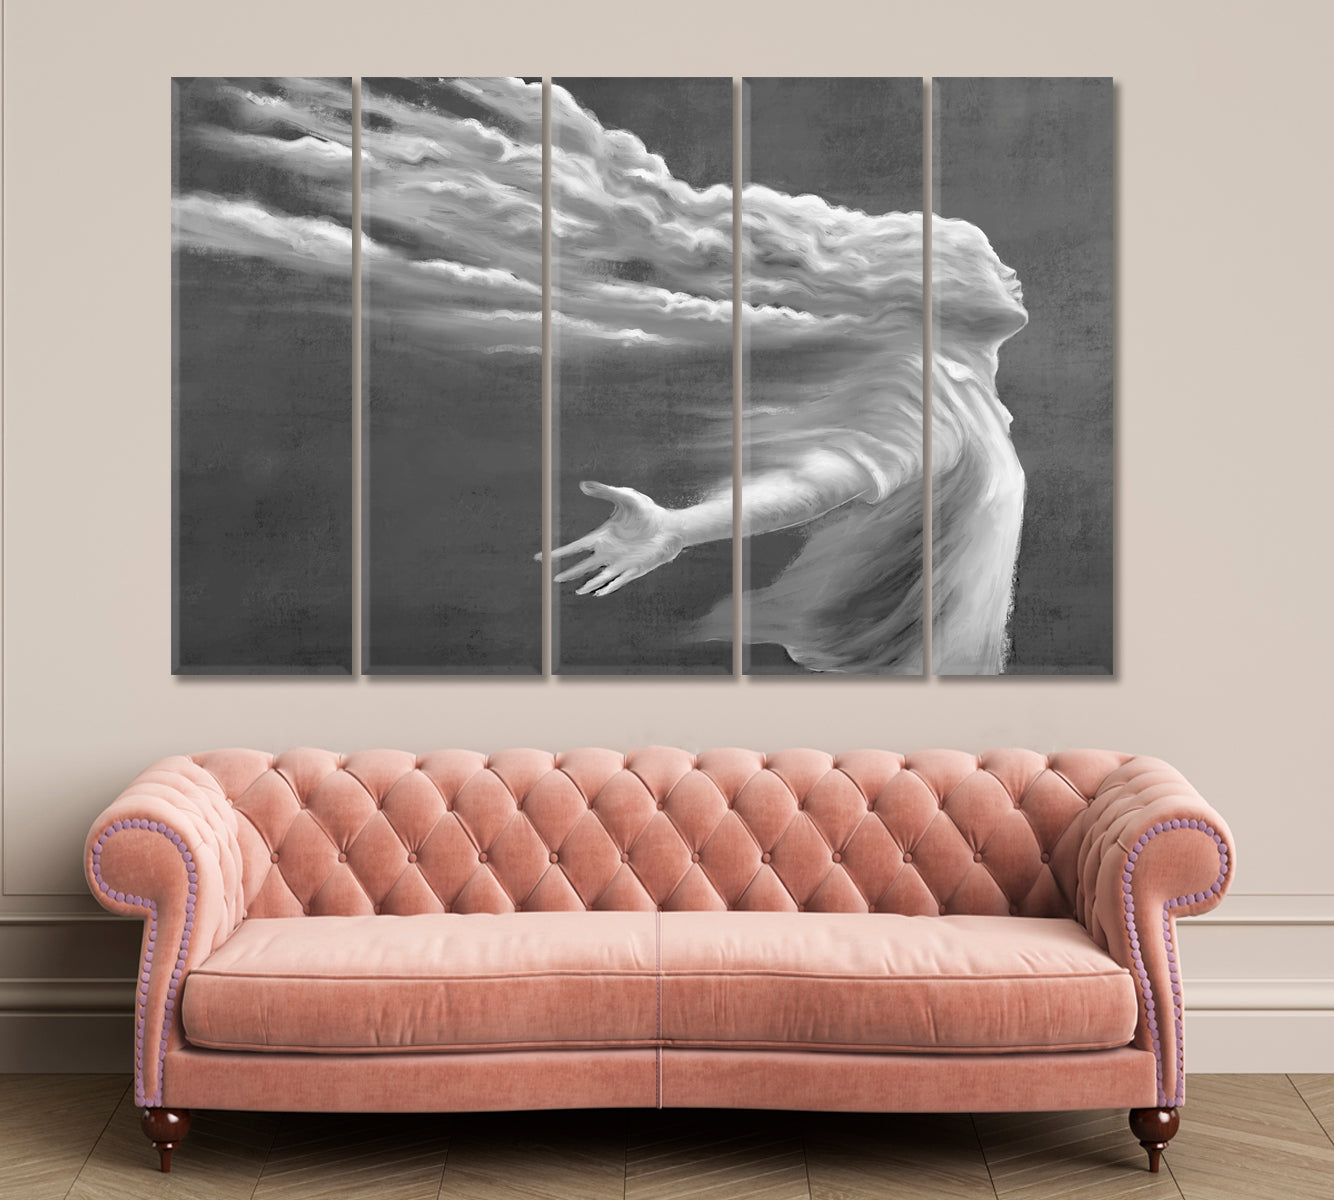 TOWARD THE WIND Spiritual Freedom Dream Happiness Concept Surreal Art Surreal Fantasy Large Art Print Décor Artesty 5 panels 36" x 24" 